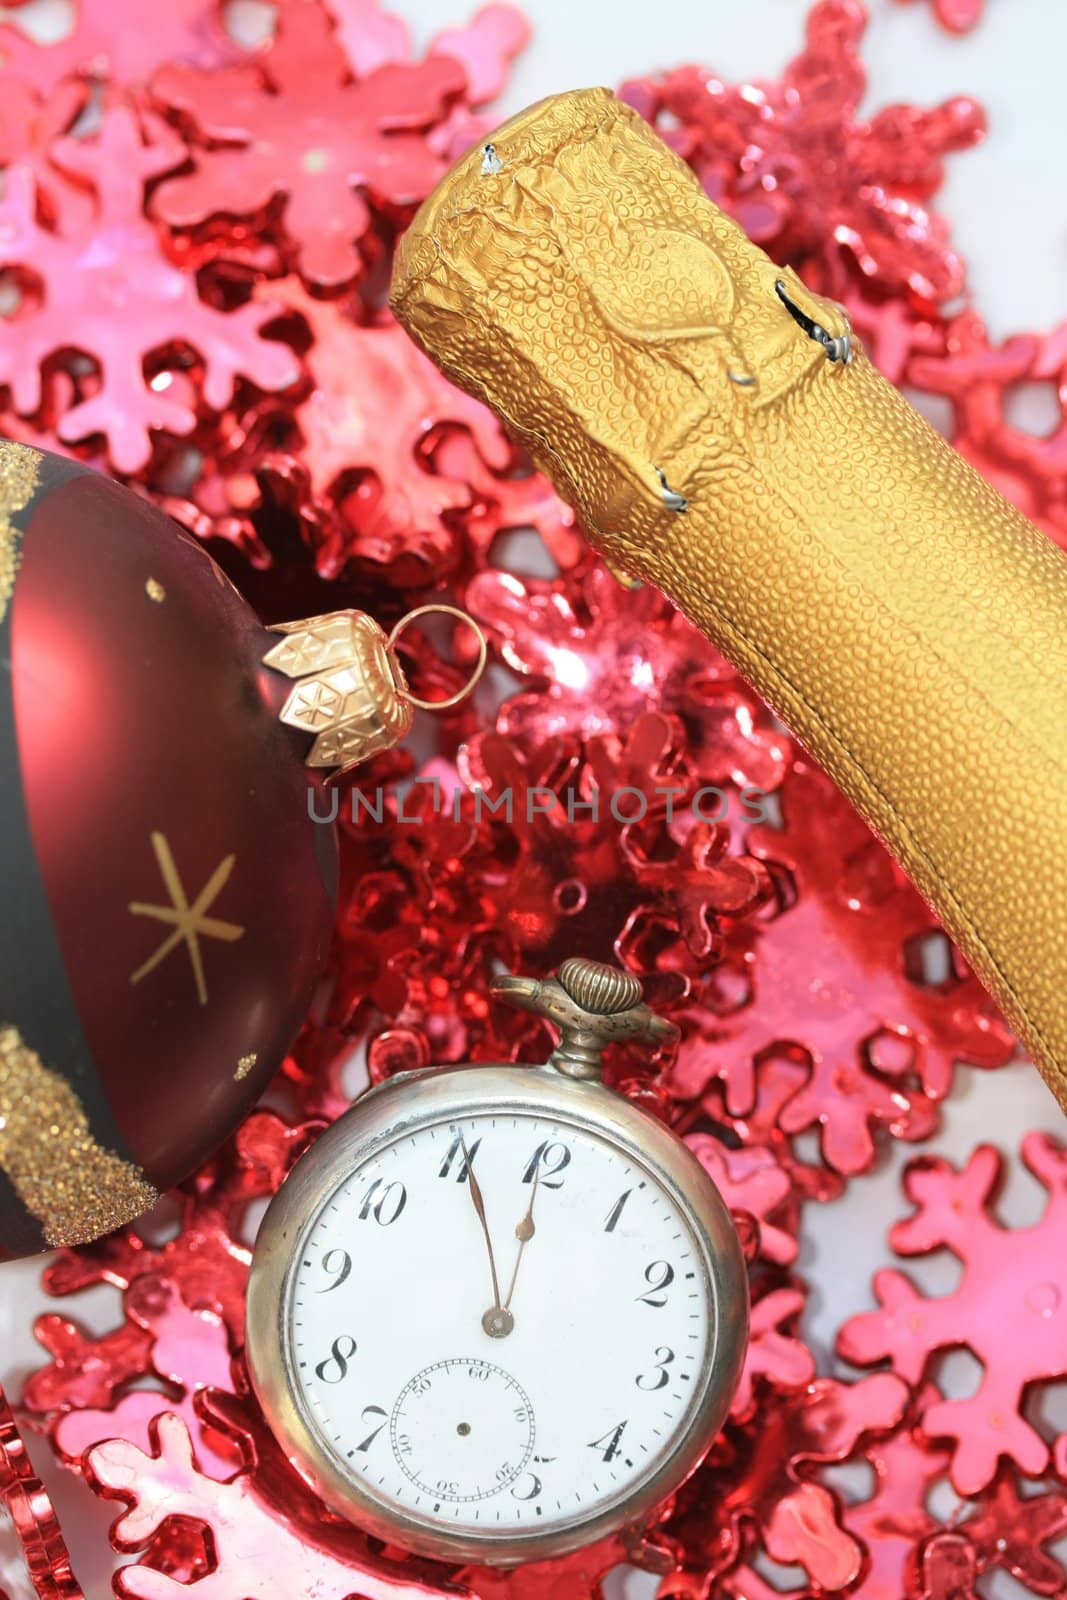 Champagne bottle, christmas ball and a vintage pocket watch